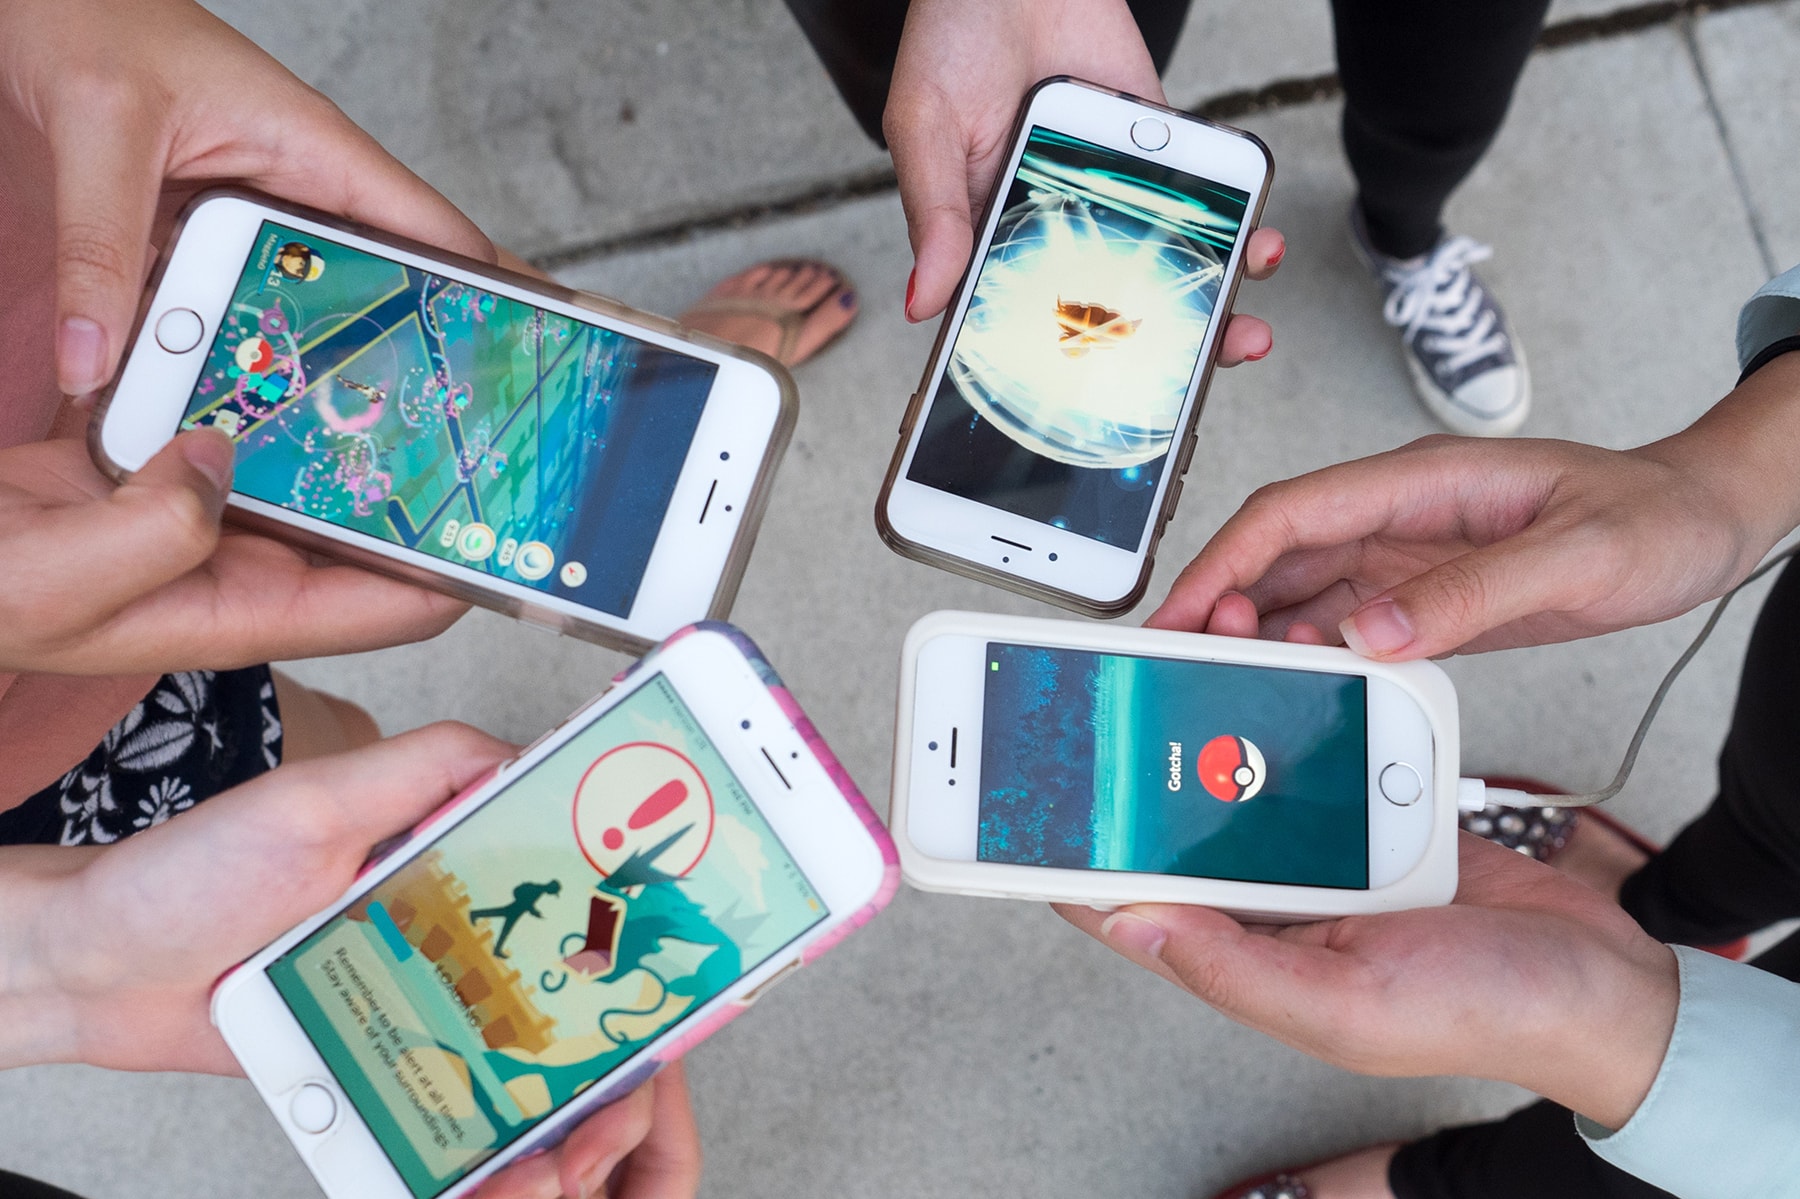 Pokémon GO $2 Billion USD in 2 Years Games Mobile Gaming 1.8 niantic labs anniversary spending